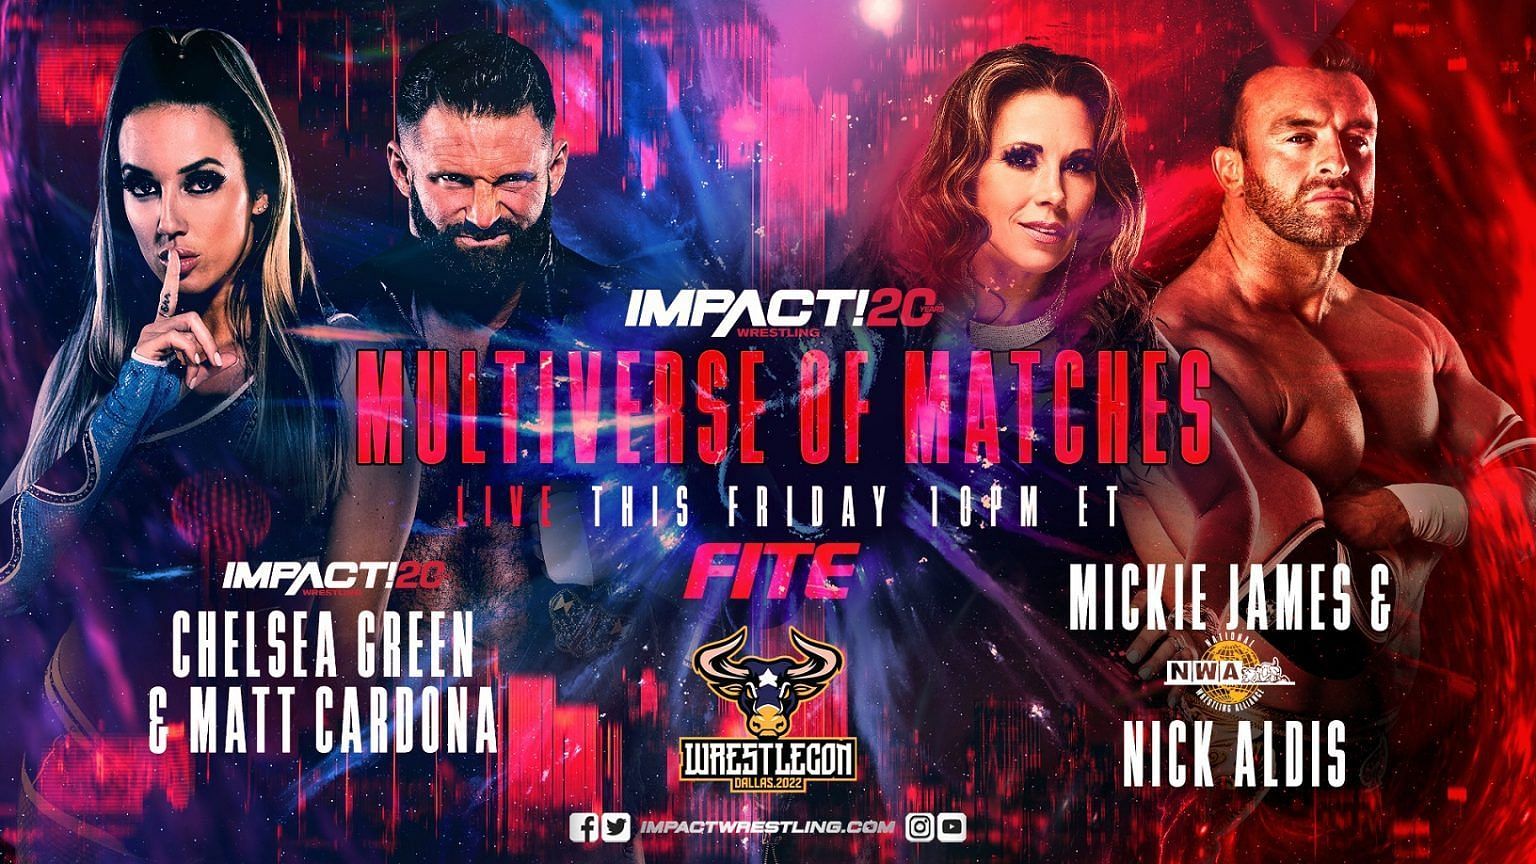 Mickie James is teaming up with her husband, Nick Aldis